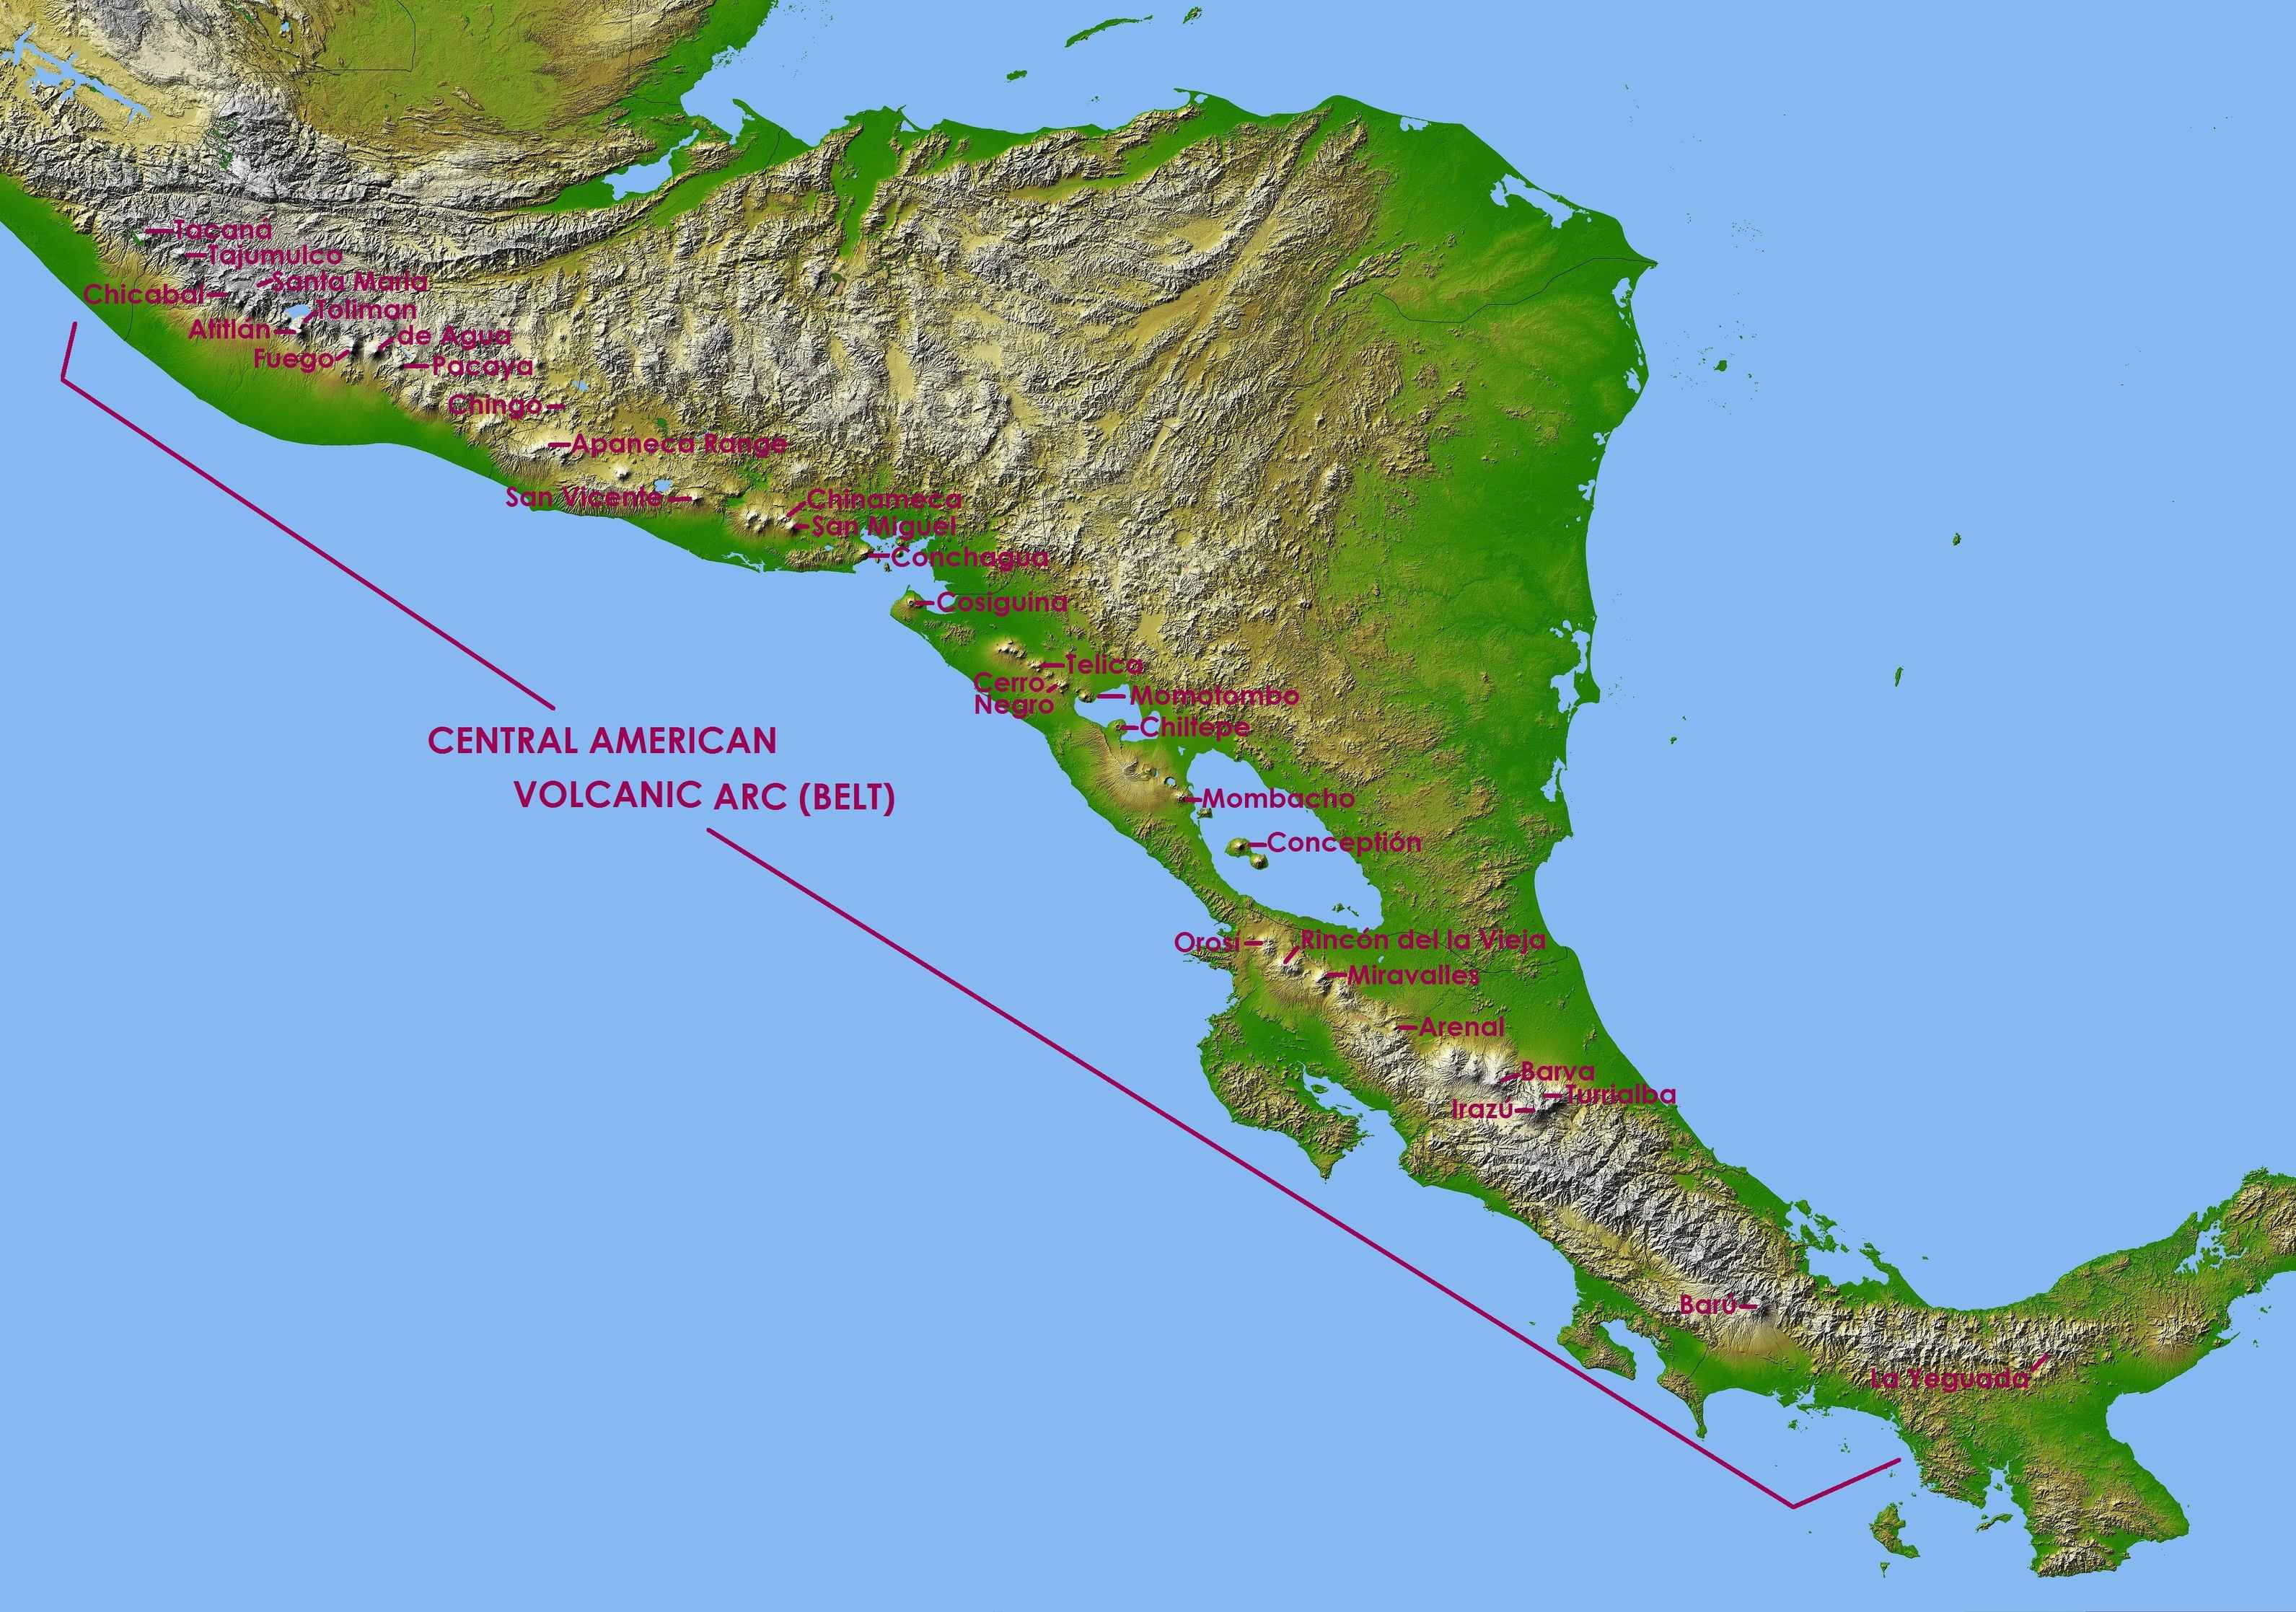 Map of the Central American Volcanic Arc with some of the main volcanoes.